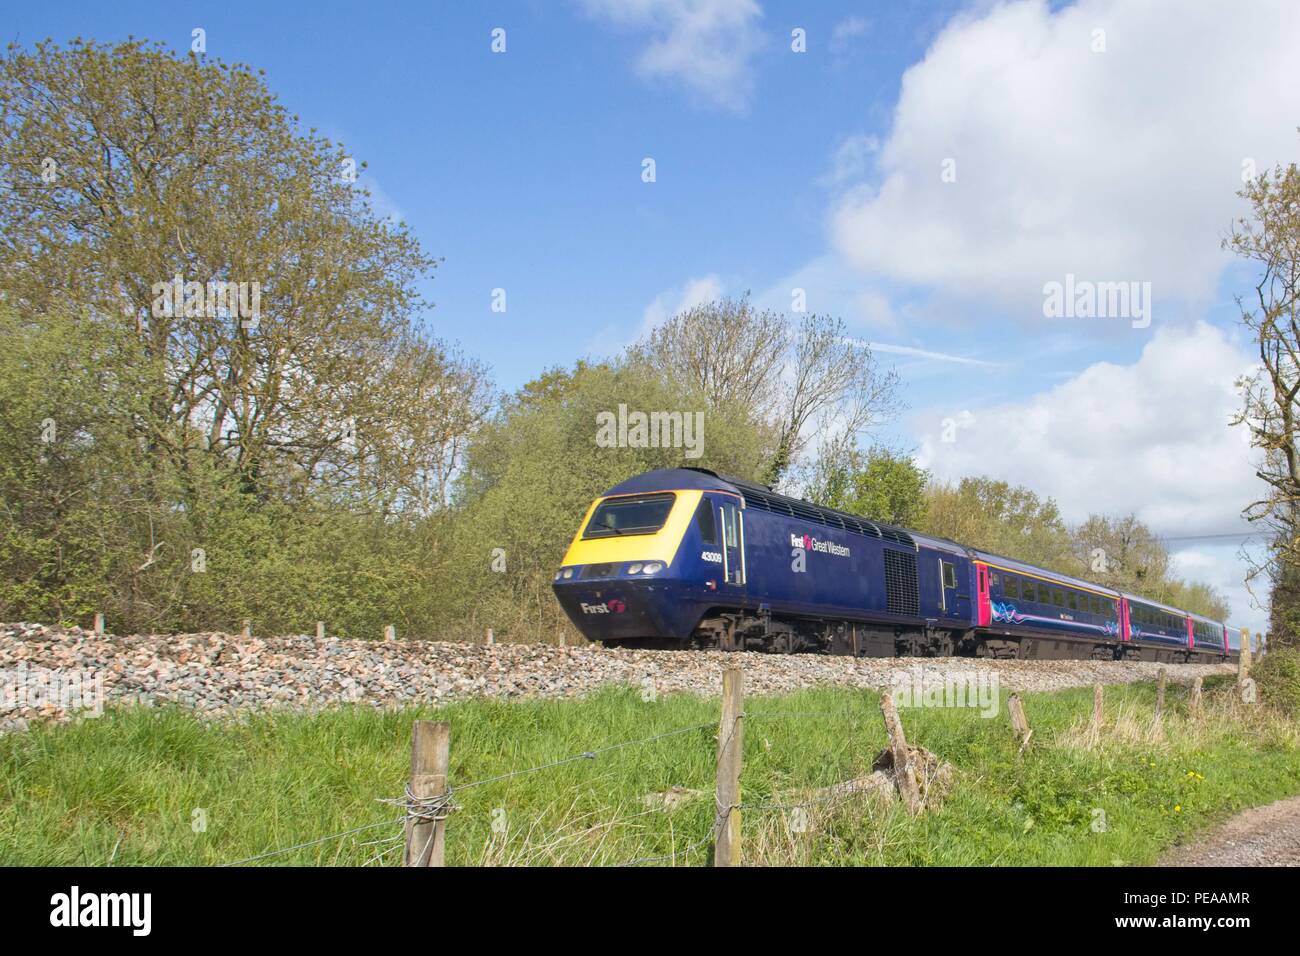 HST 43 Class diesel with passenger train on embankment with trees and blue sky. Stock Photo